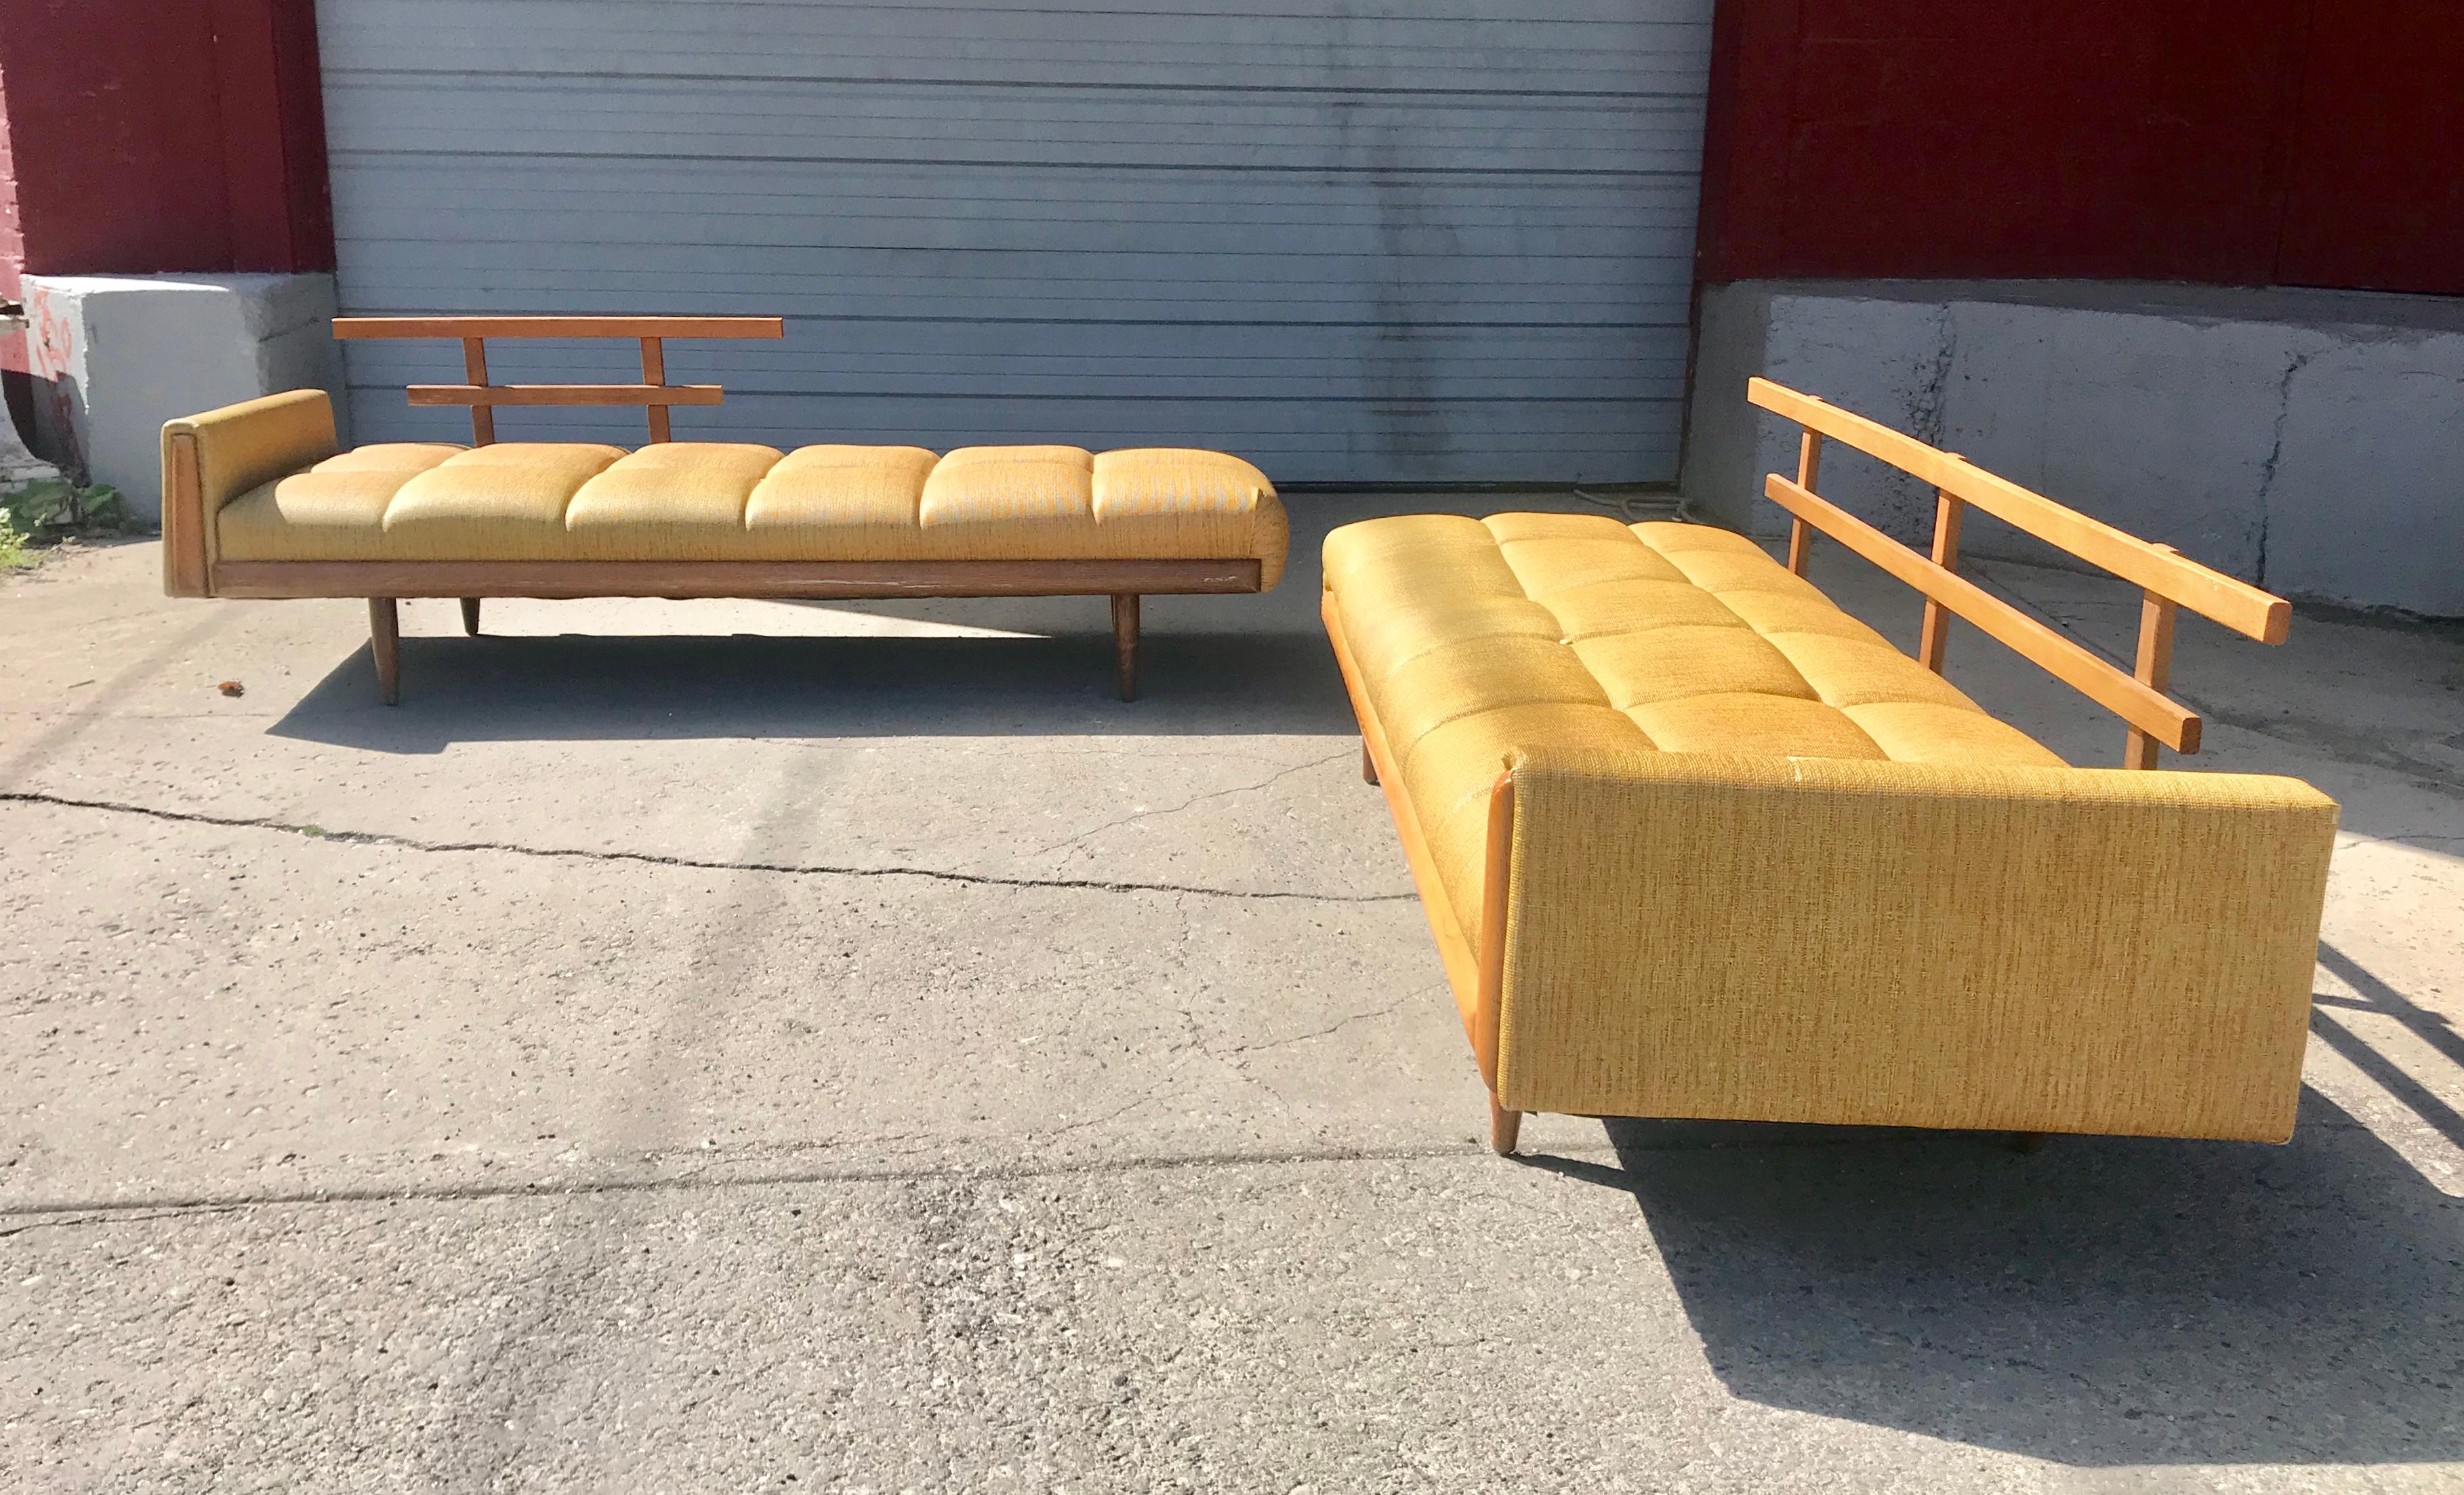 modernist button tufted daybed attributed to Adrian Pearsall, nice quality, retains original mustard color vinyl fabric in fine useable condition but would be amazing reupholstered, warm walnut wood finish in great original condition, wonderful